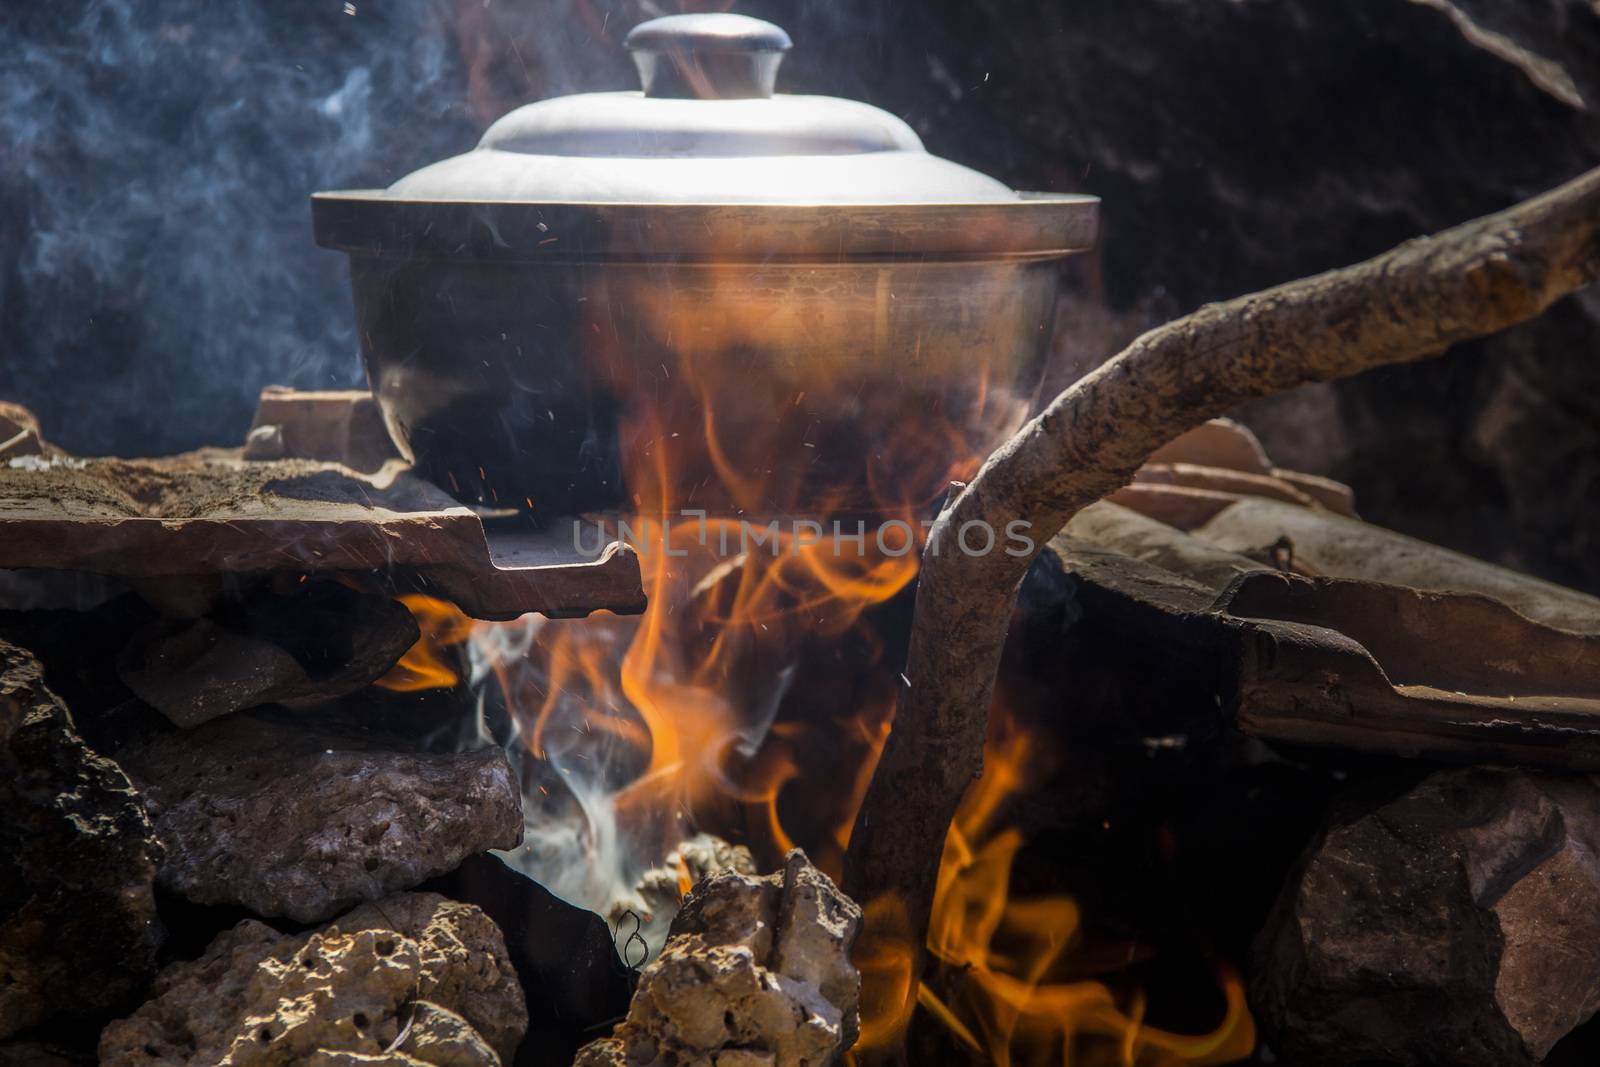 pot of fish soup being prepared on the fire, a warm quiet evening